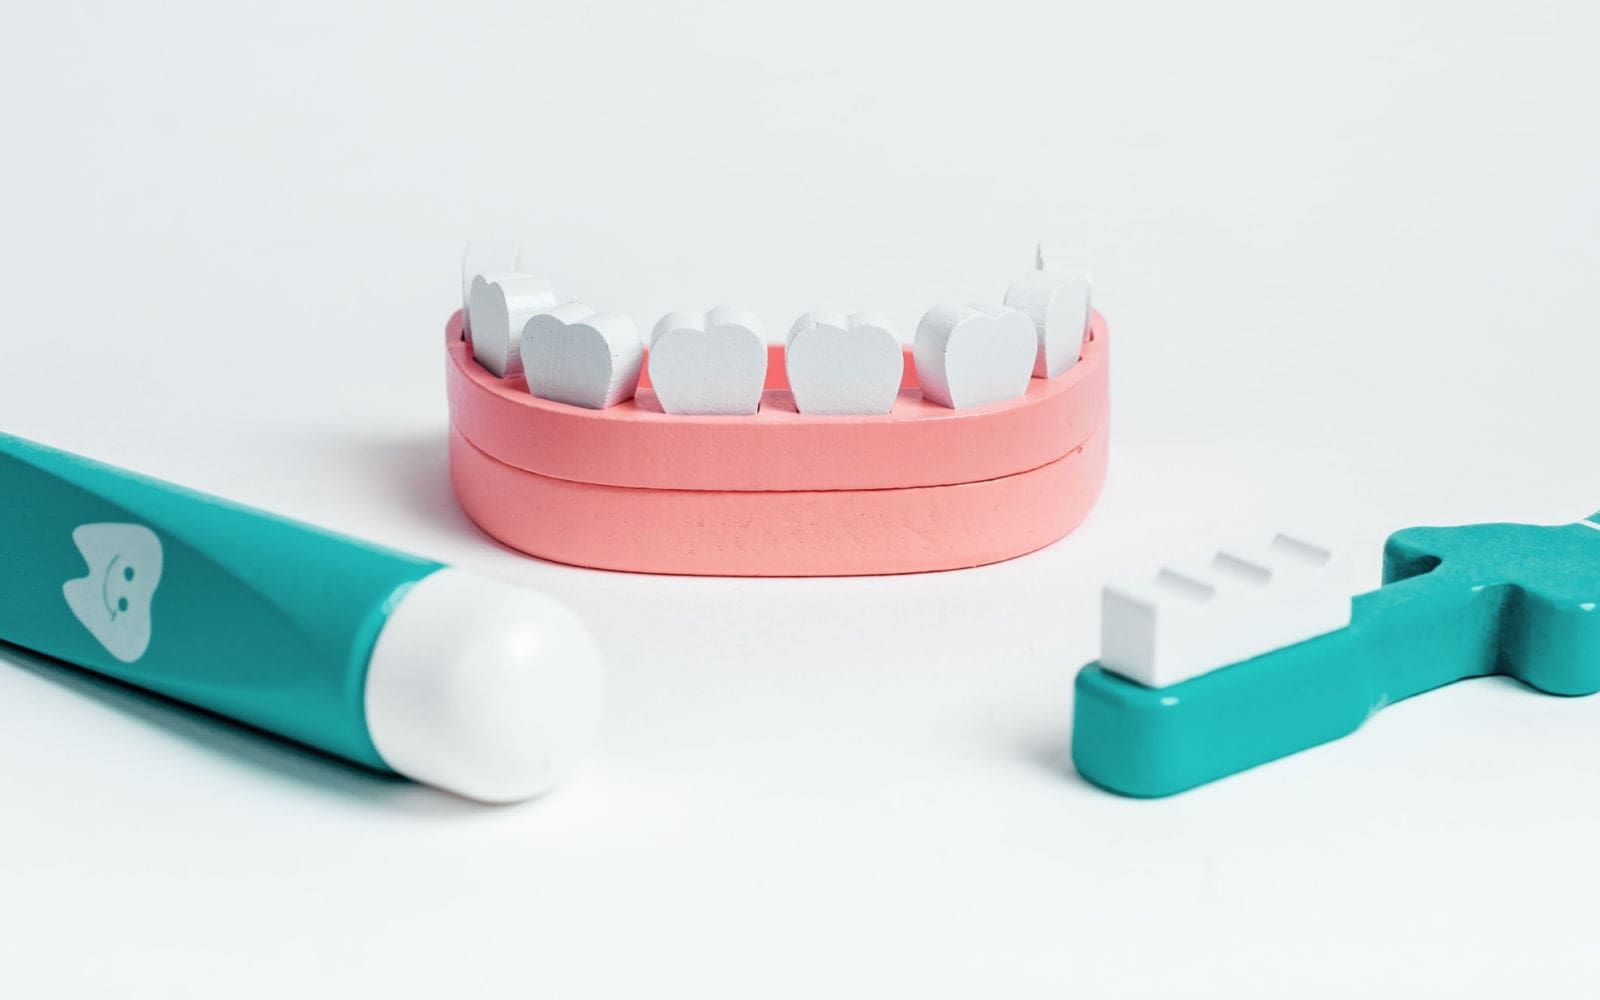 Dental toy with teeth, toothbrush and toothpaste